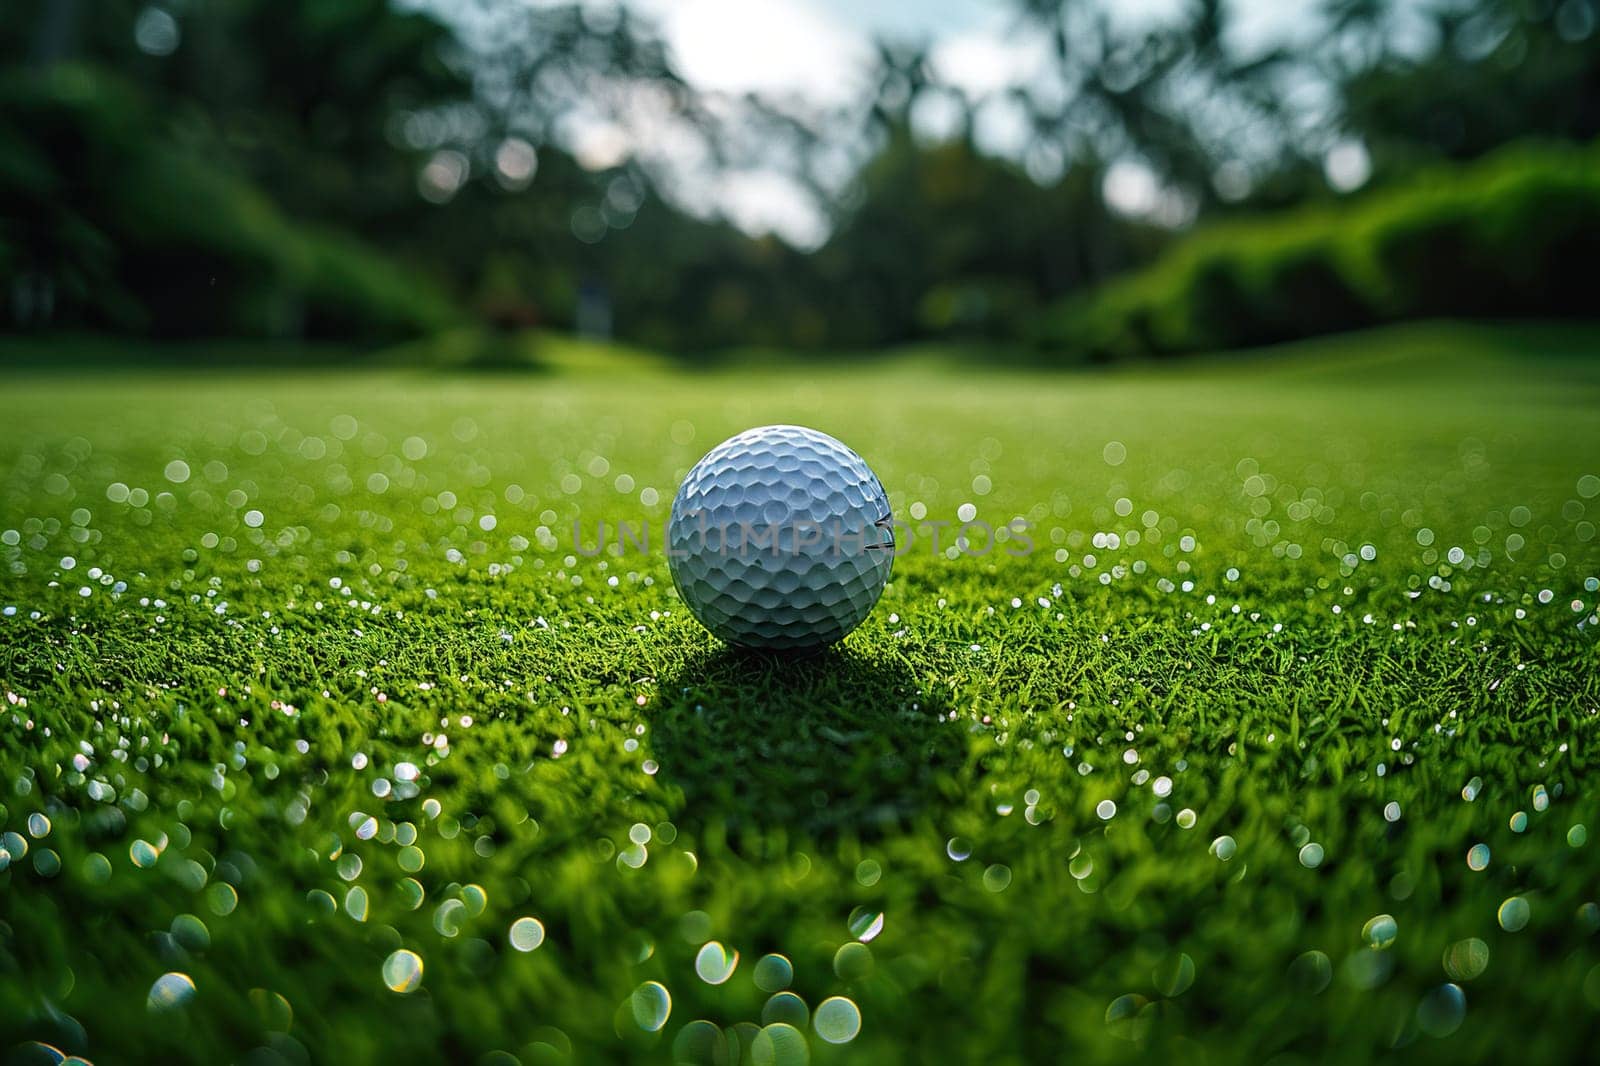 Golf ball in wet green grass on a blurred background.